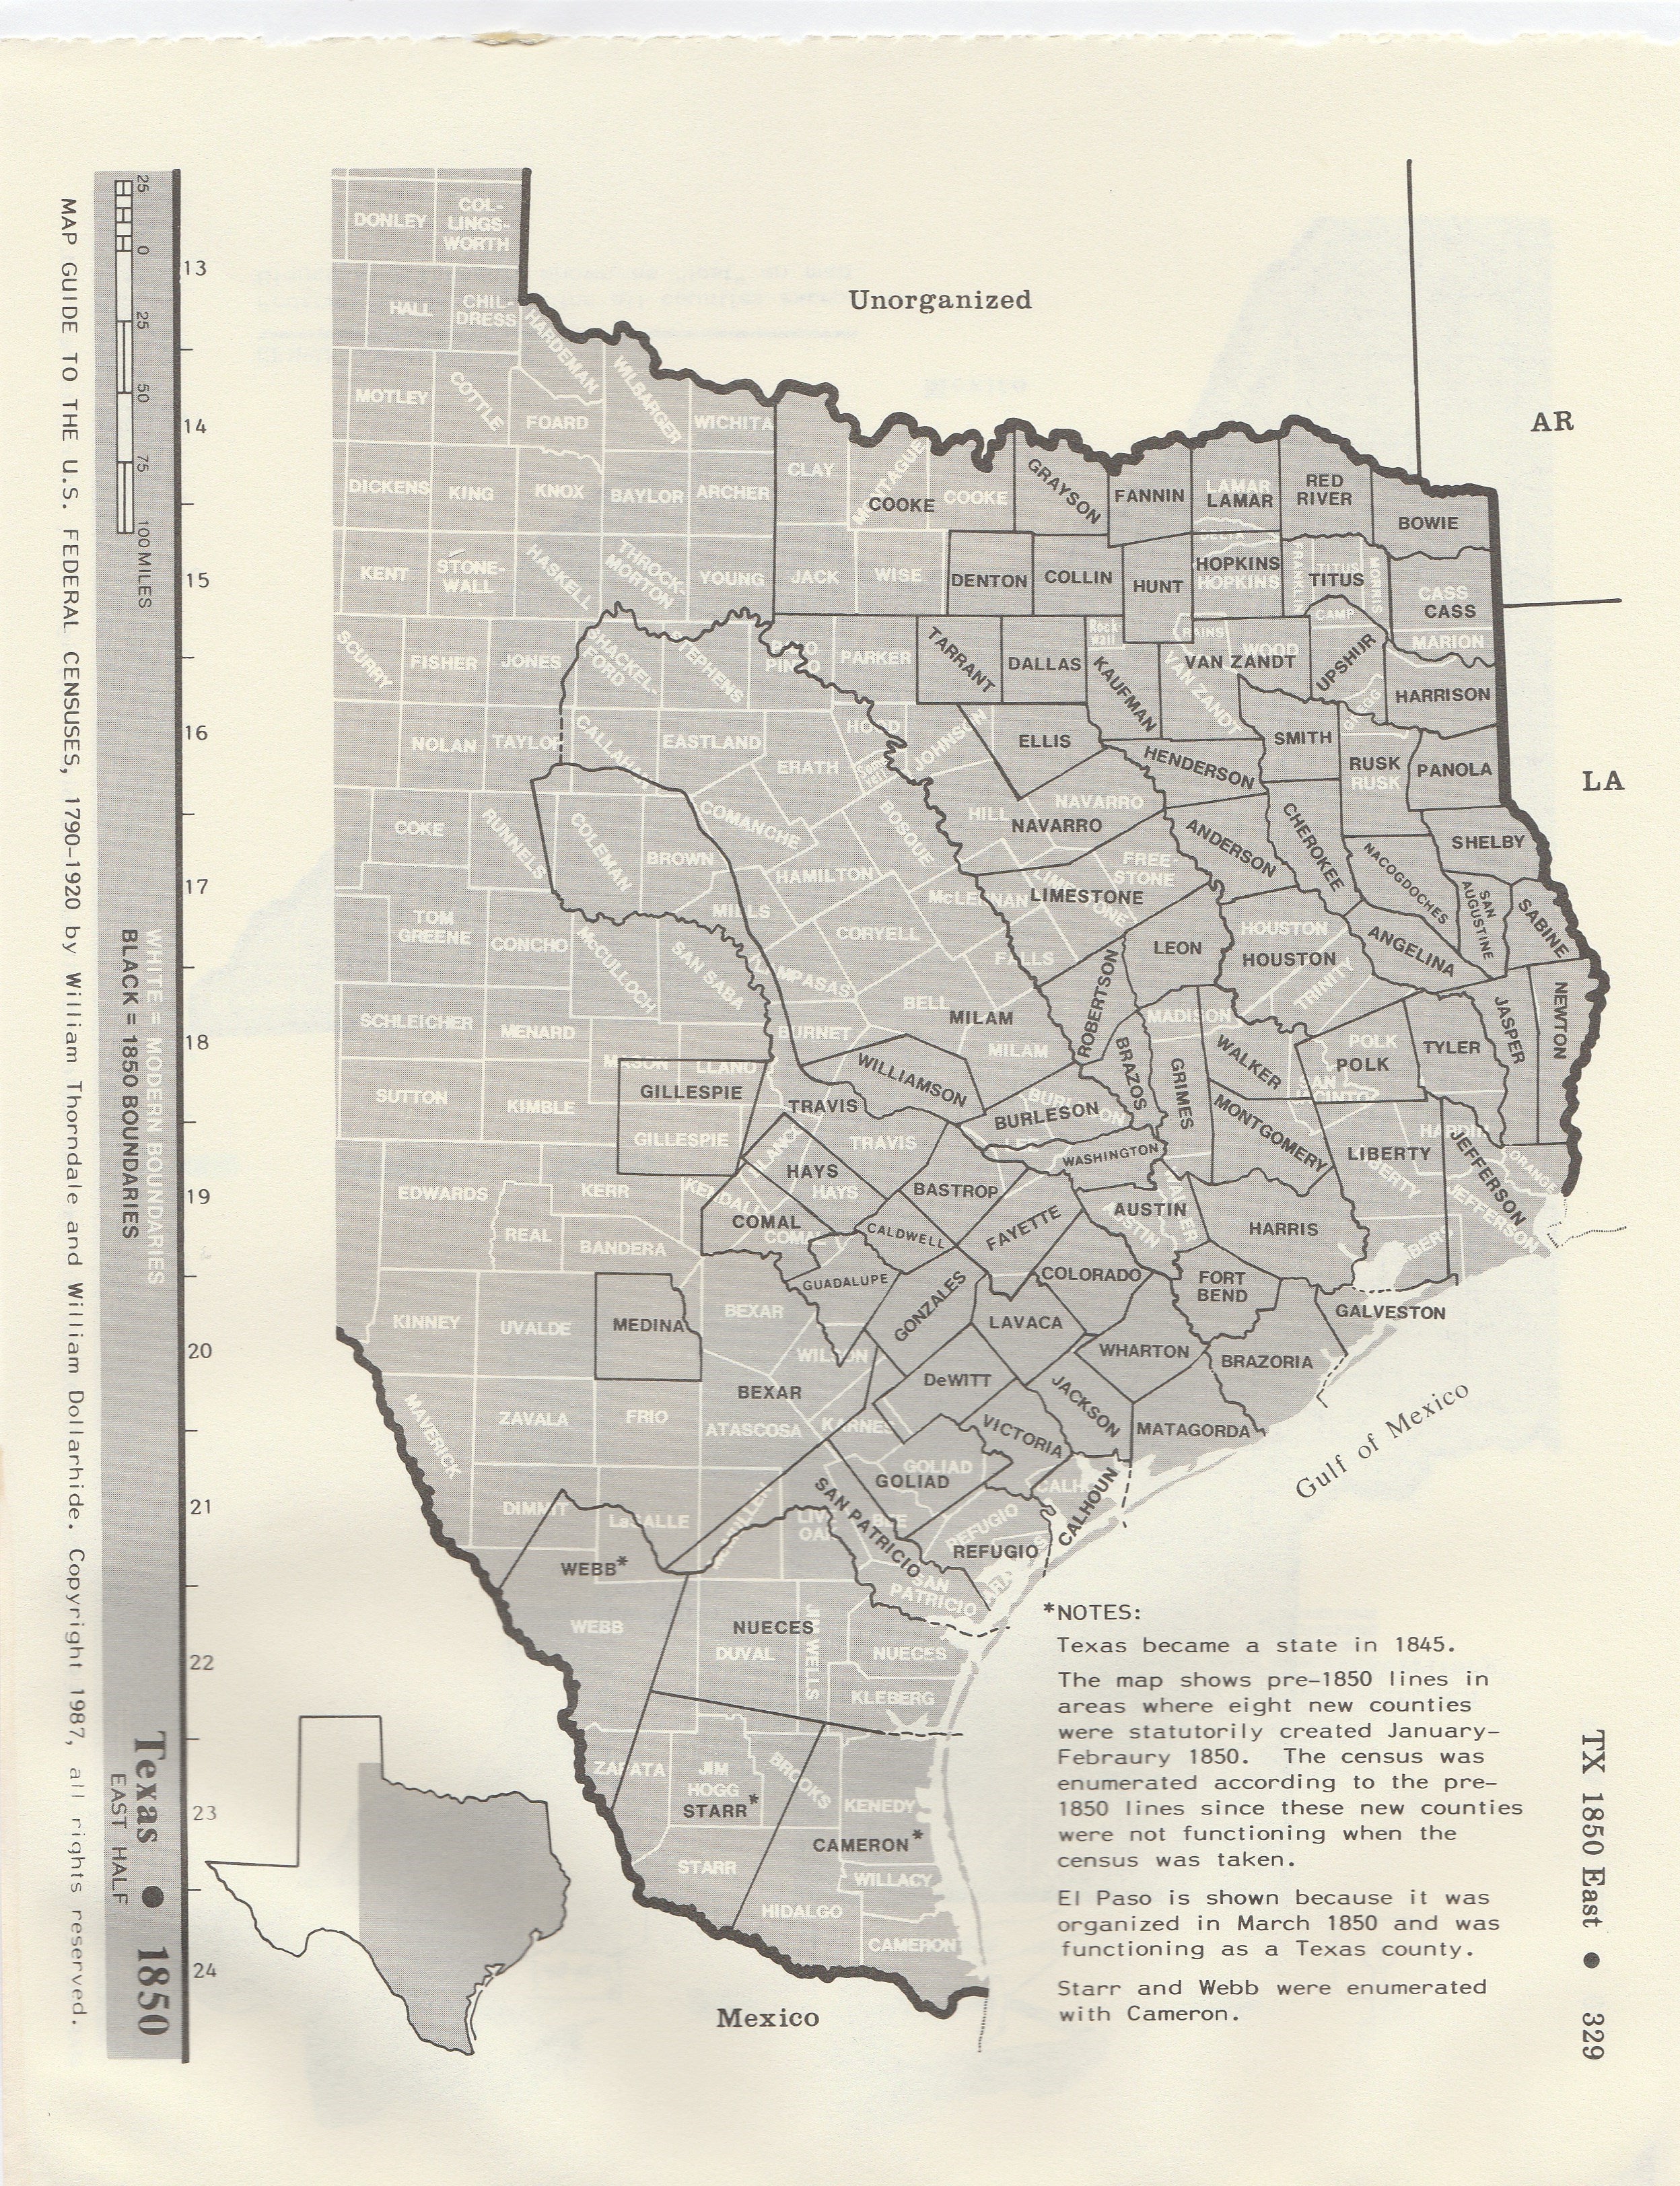 Texas Censuses & Substitute Name Lists, 1716-2012 - PDF eBook